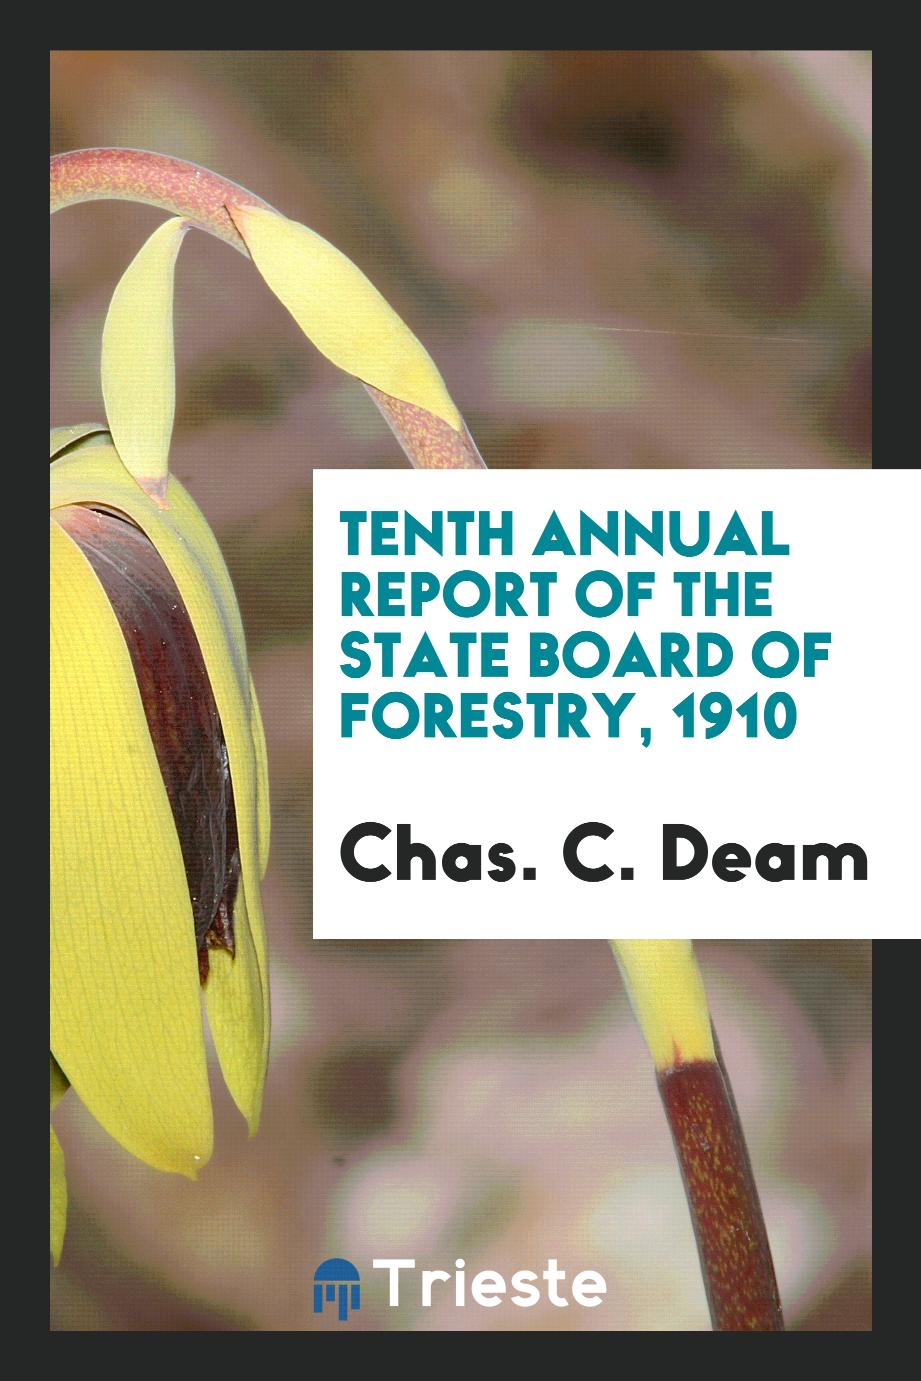 Tenth Annual Report of the State Board of Forestry, 1910